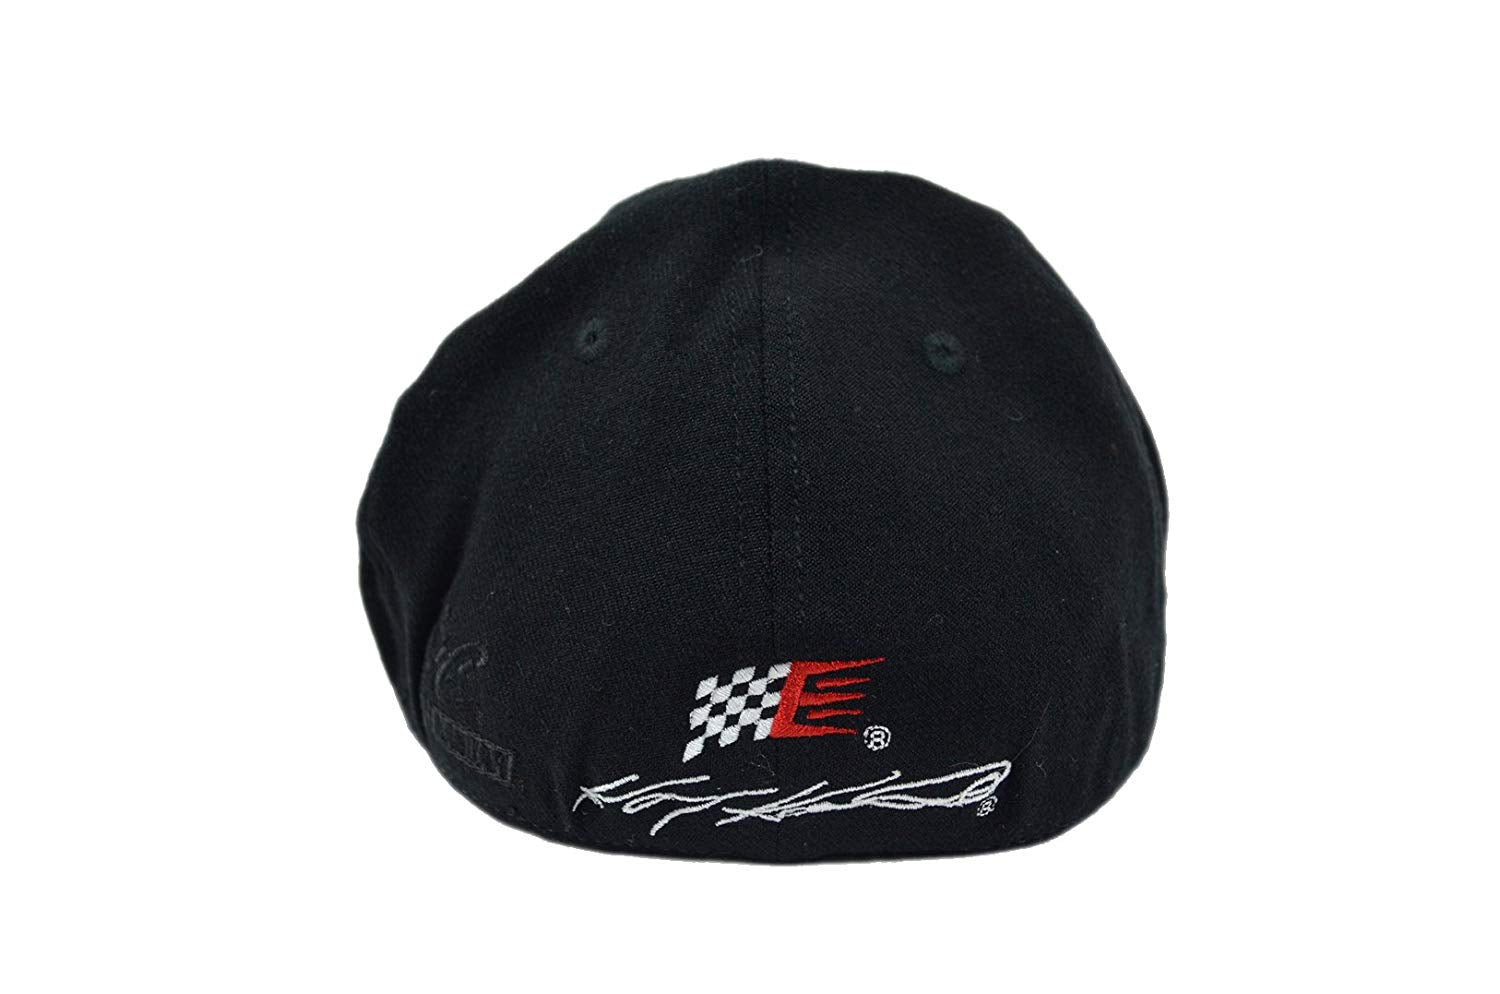 Official NASCAR Fan Shop Authentic Adjustable Baseball Caps. Show NASCAR Pride and Enjoy the comfort of these caps in cotton, mesh, polyester and khaki